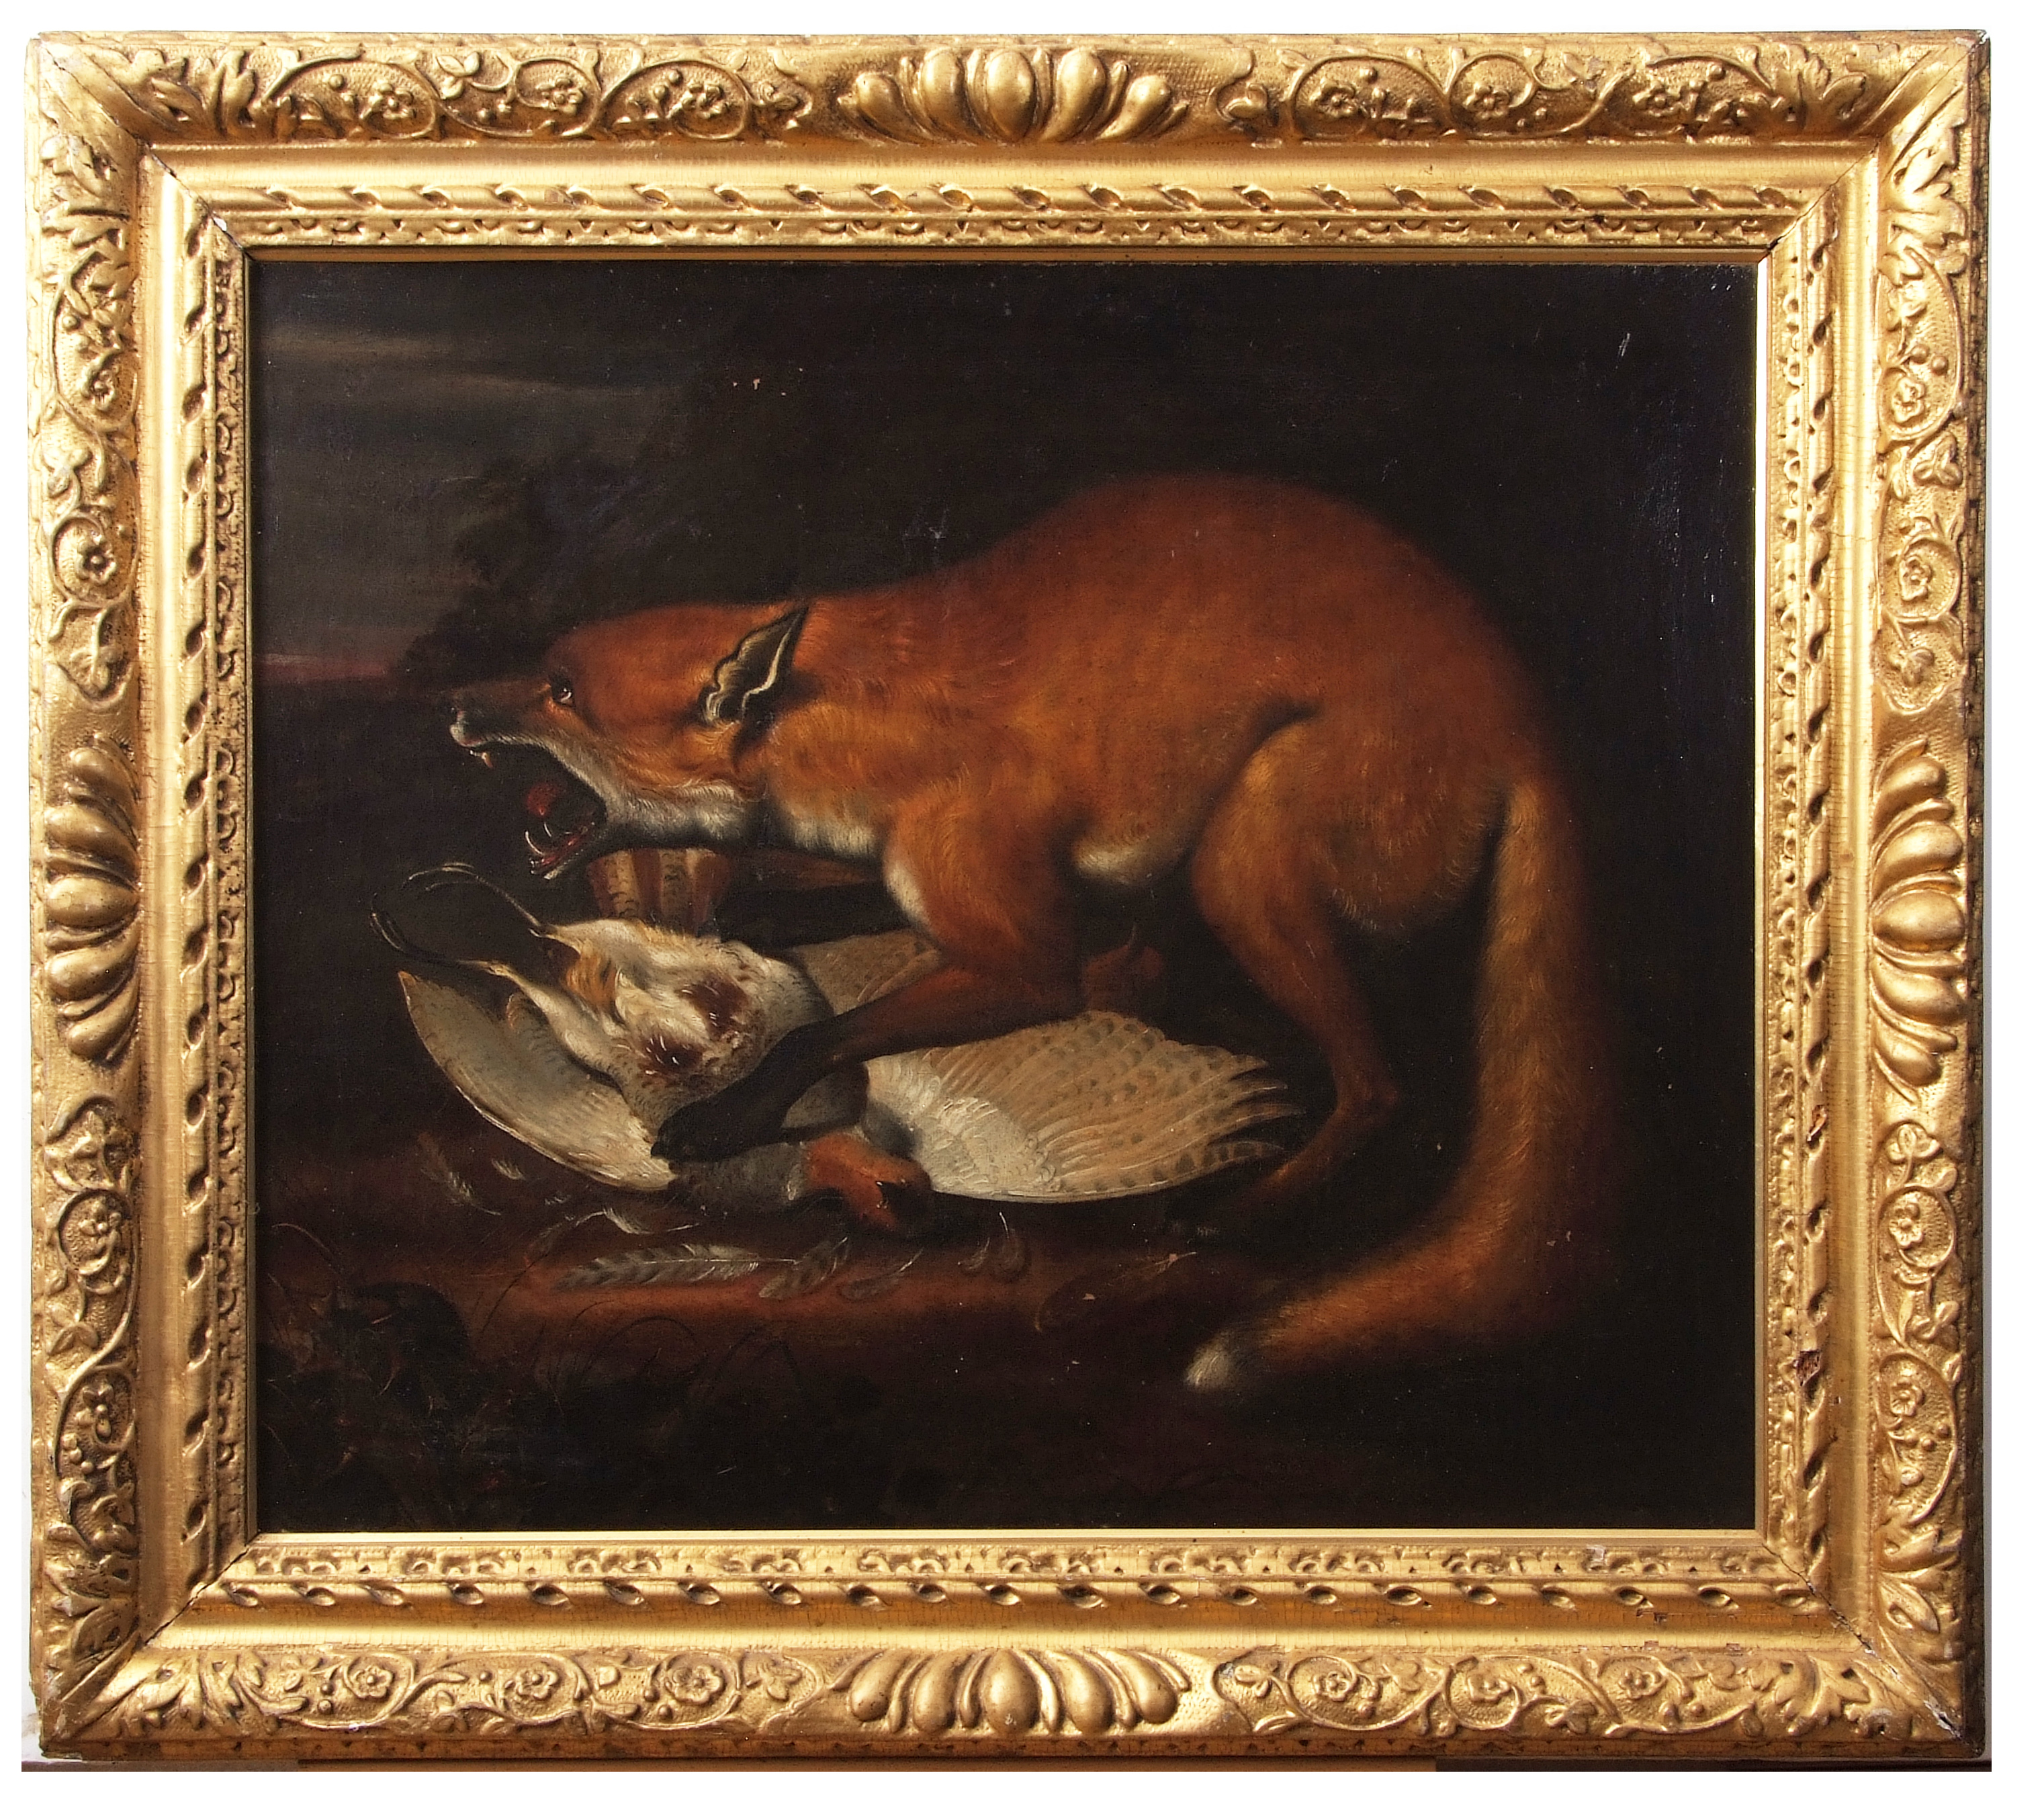 Attributed to Pieter Andreas Rysbraeck (1690-1748), Fox with game bird, oil on canvas, 62 x 74cm